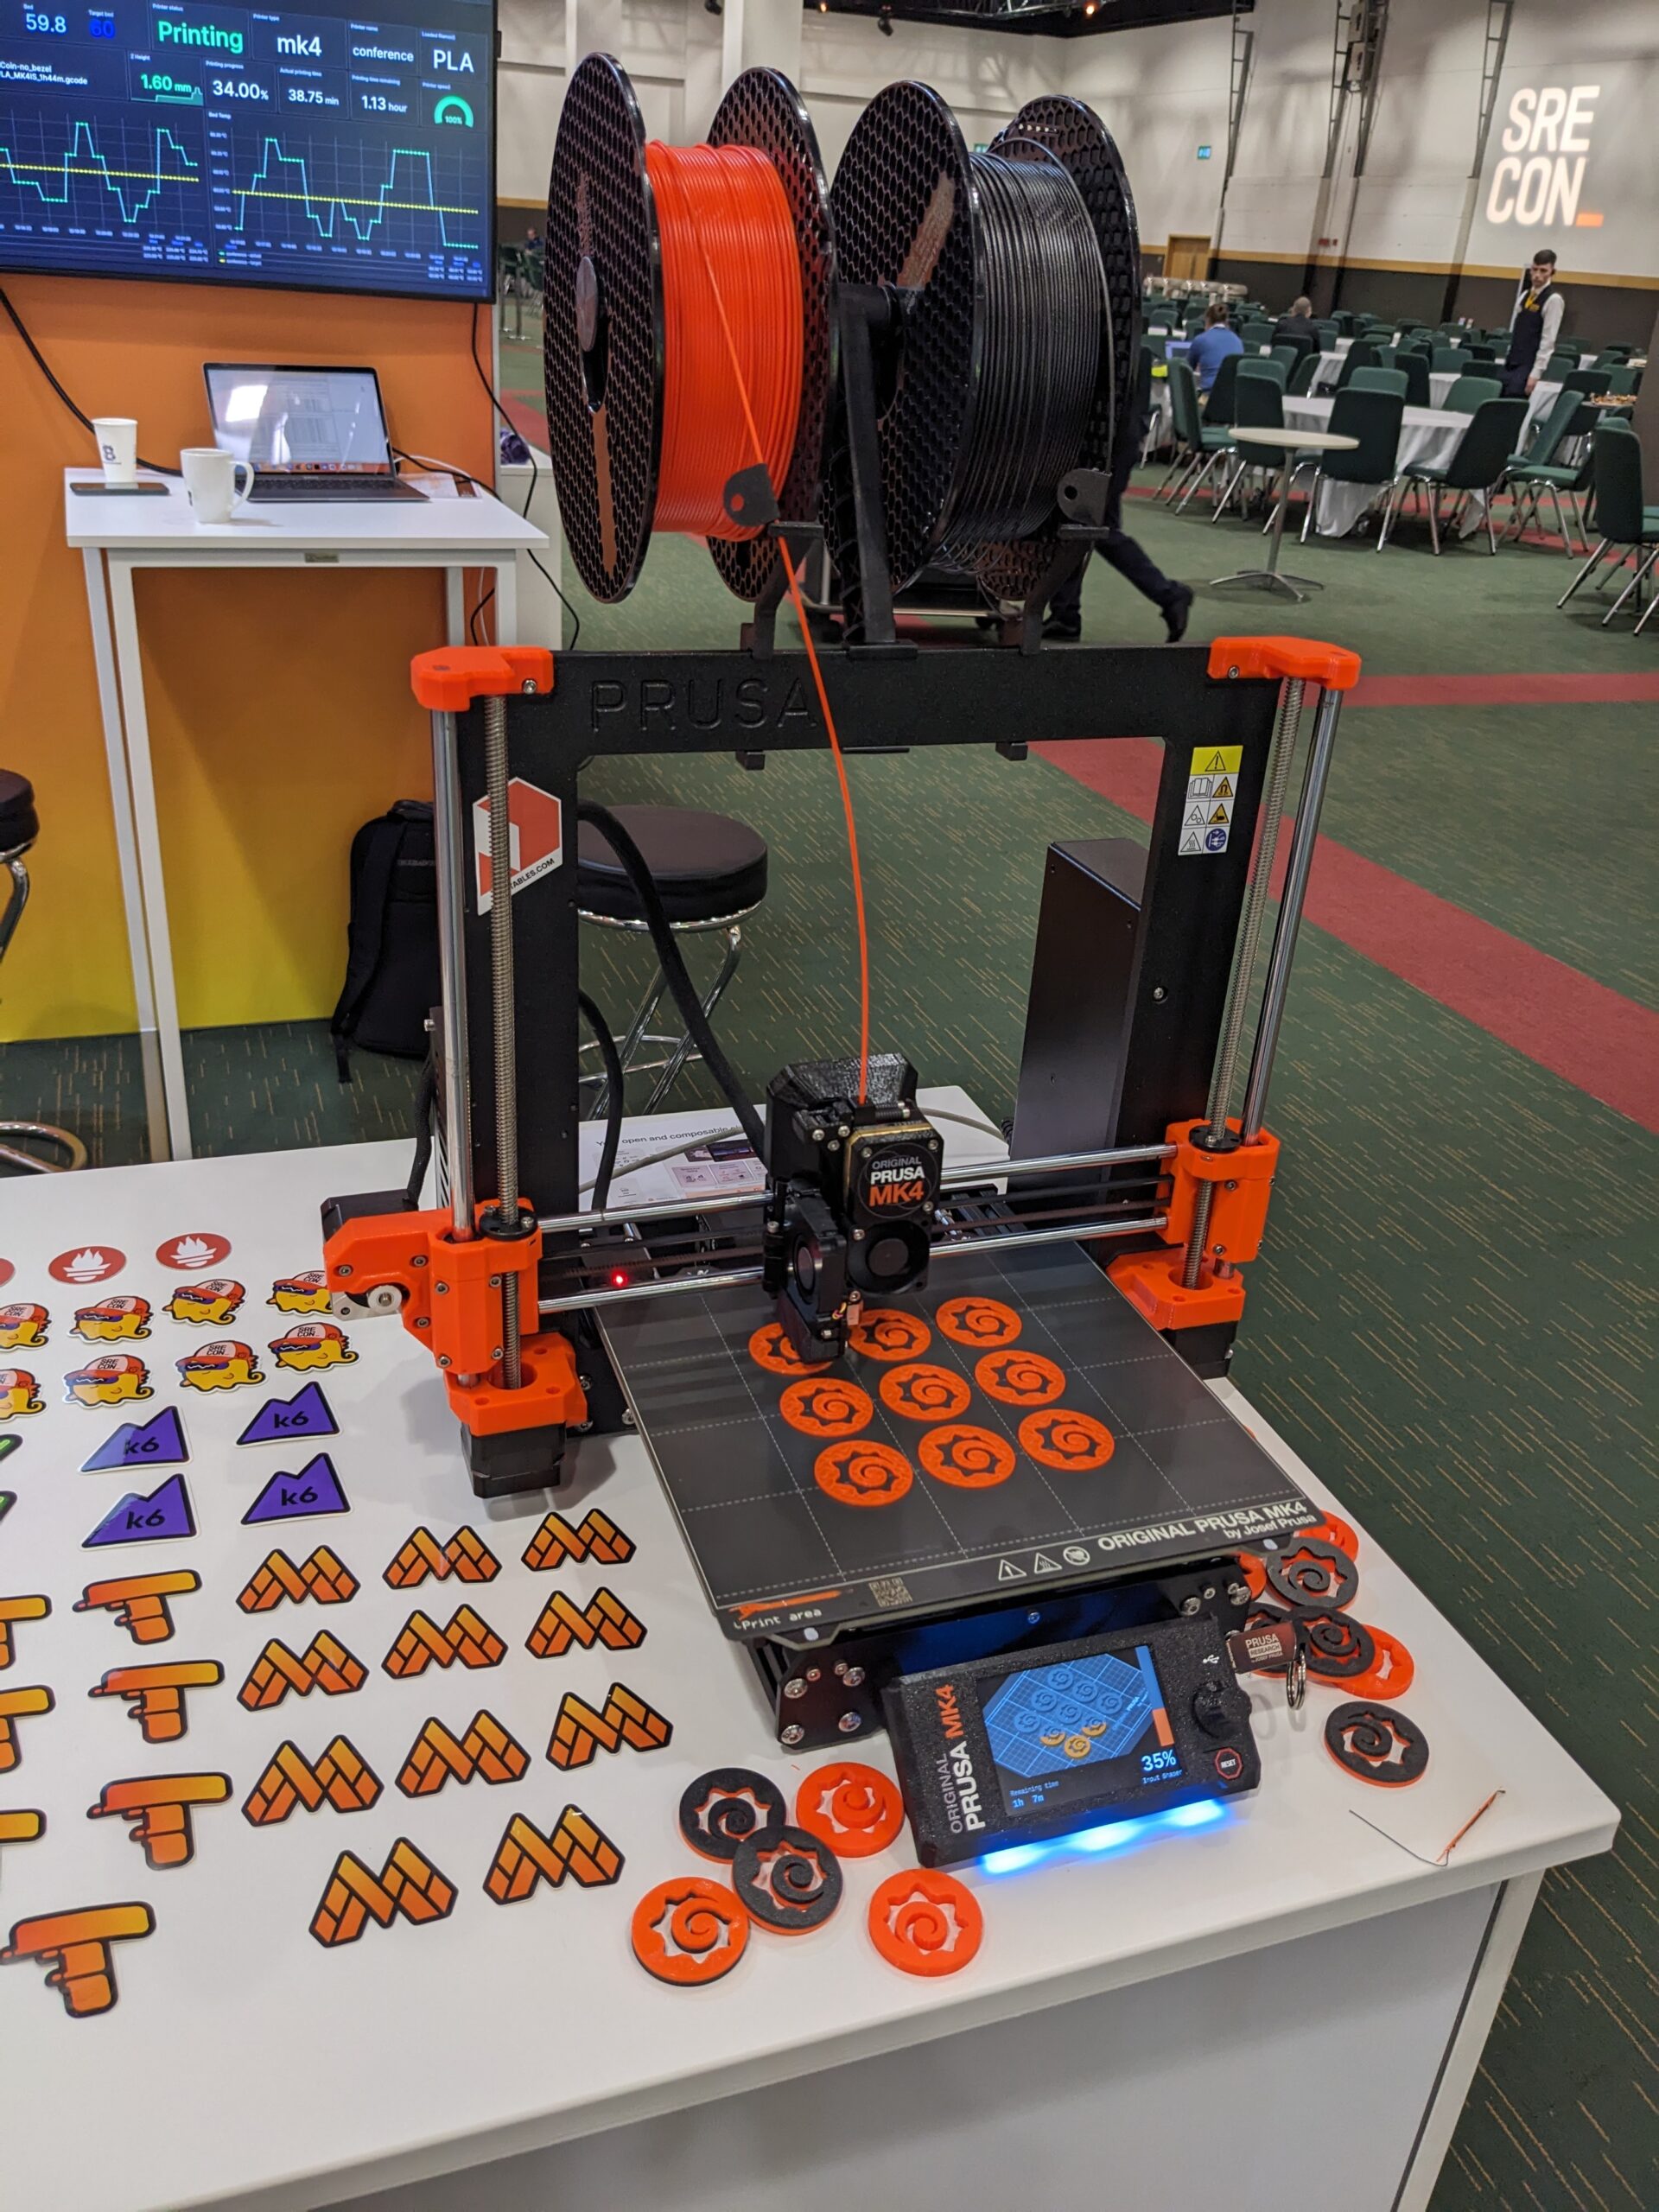 A 3D printer at a trade show booth. It is printing orange spirals that are the Prometheus logo